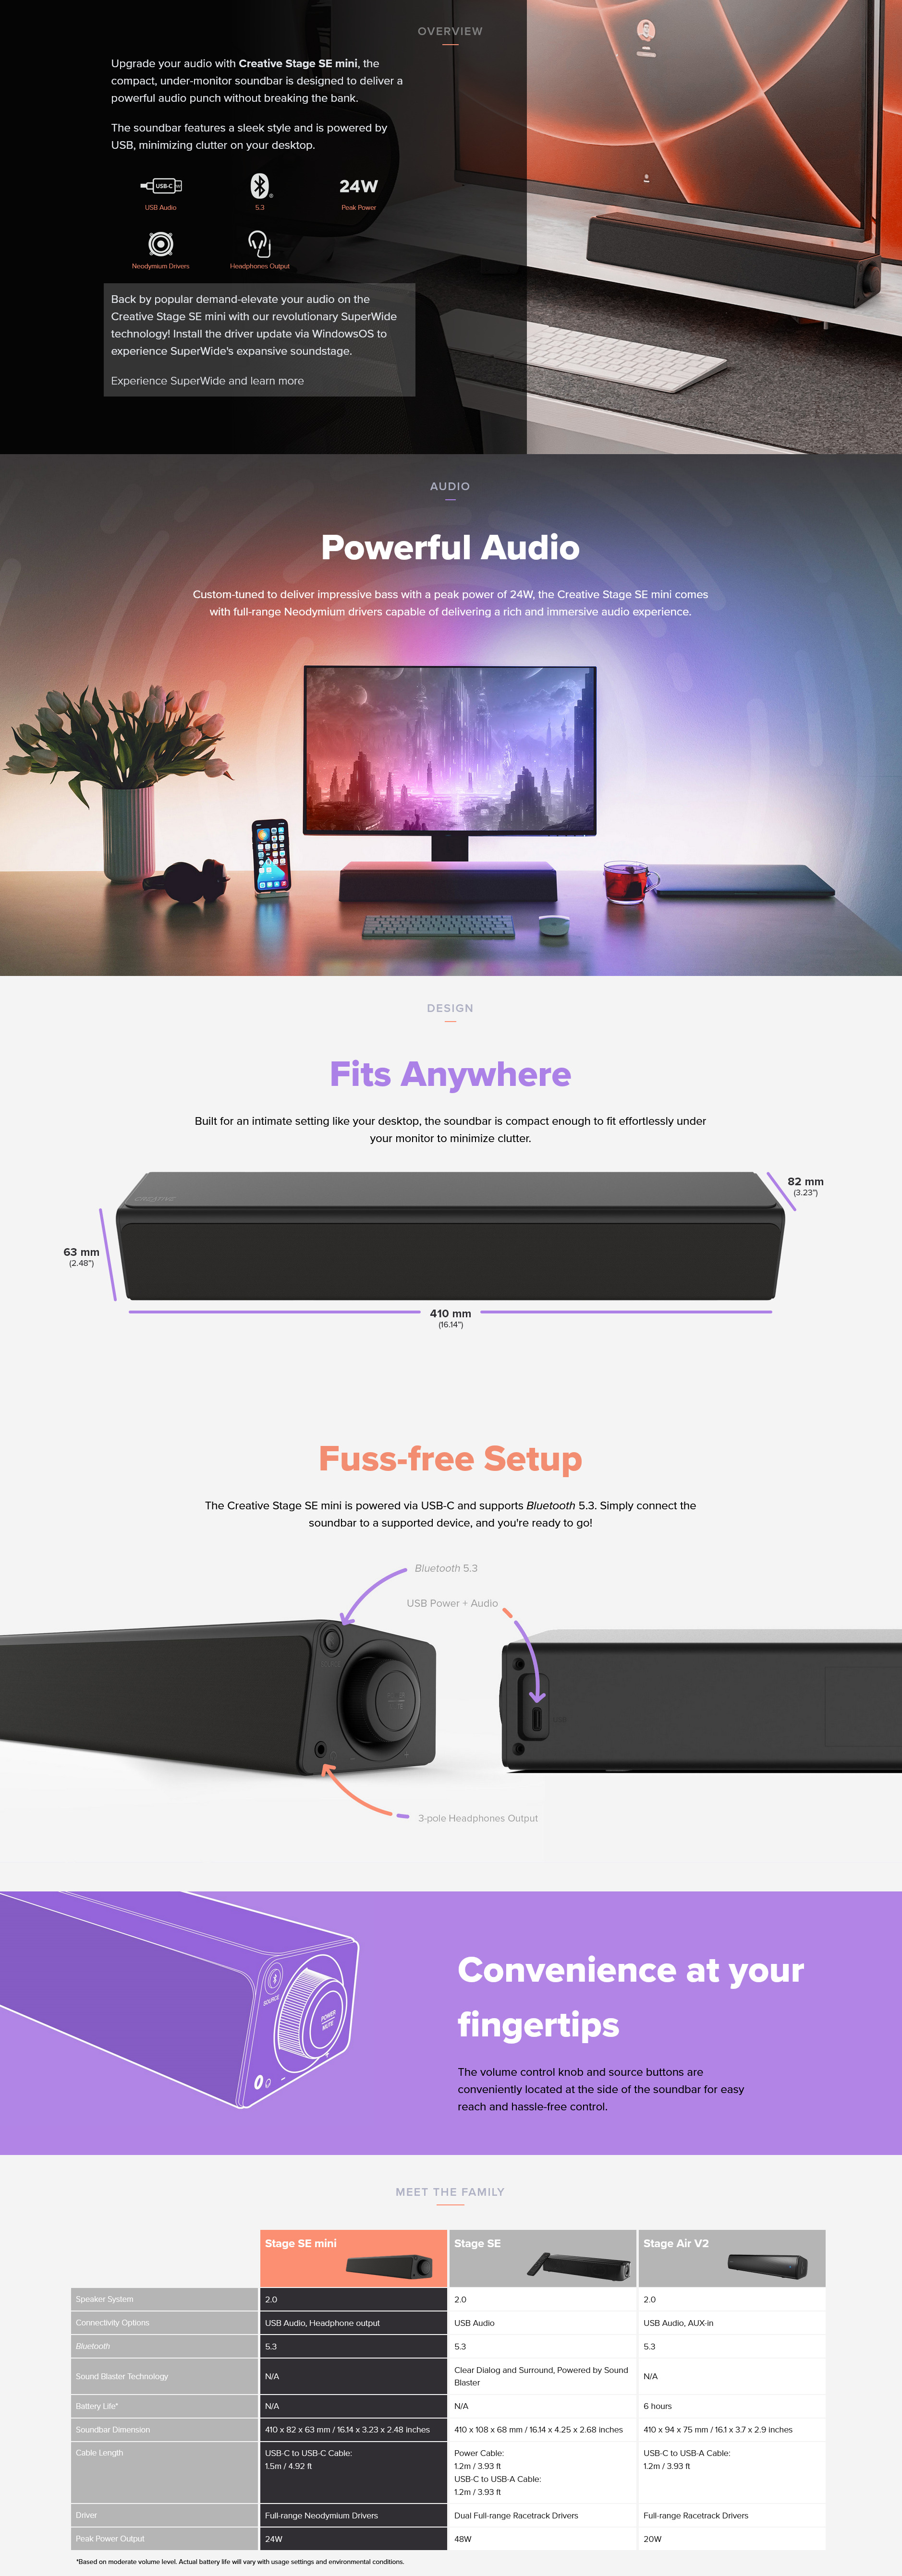 A large marketing image providing additional information about the product Creative Stage SE Mini Bluetooth Soundbar - Additional alt info not provided